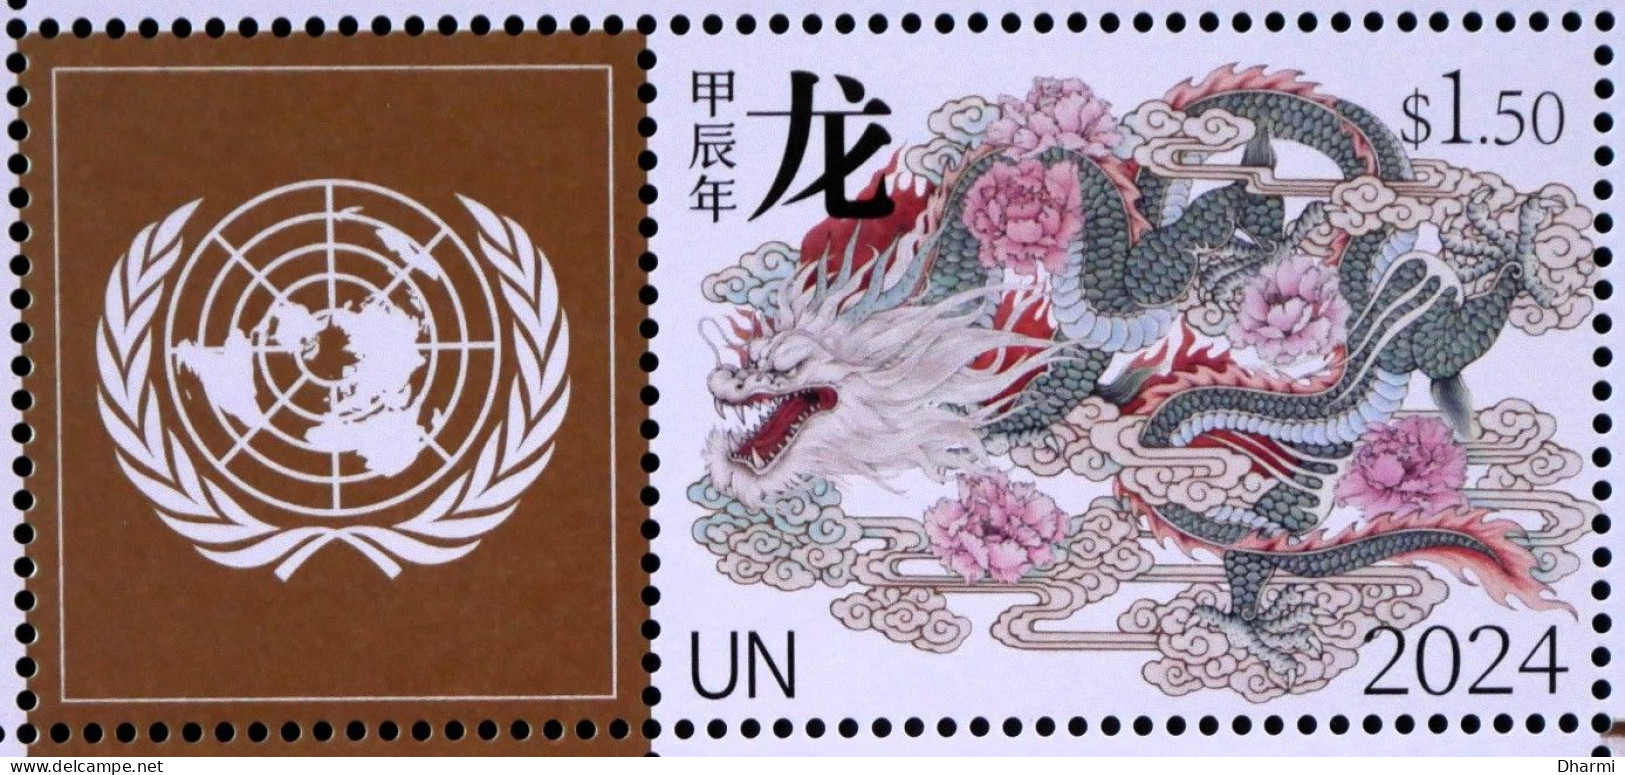 ONU - UNITED NATIONS 2024 - NATIONS UNIES - NEUF** 1TG - LUNAR YEAR OF THE DRAGON - ANNEE LUNAIRE DU DRAGON - MNH - Unused Stamps